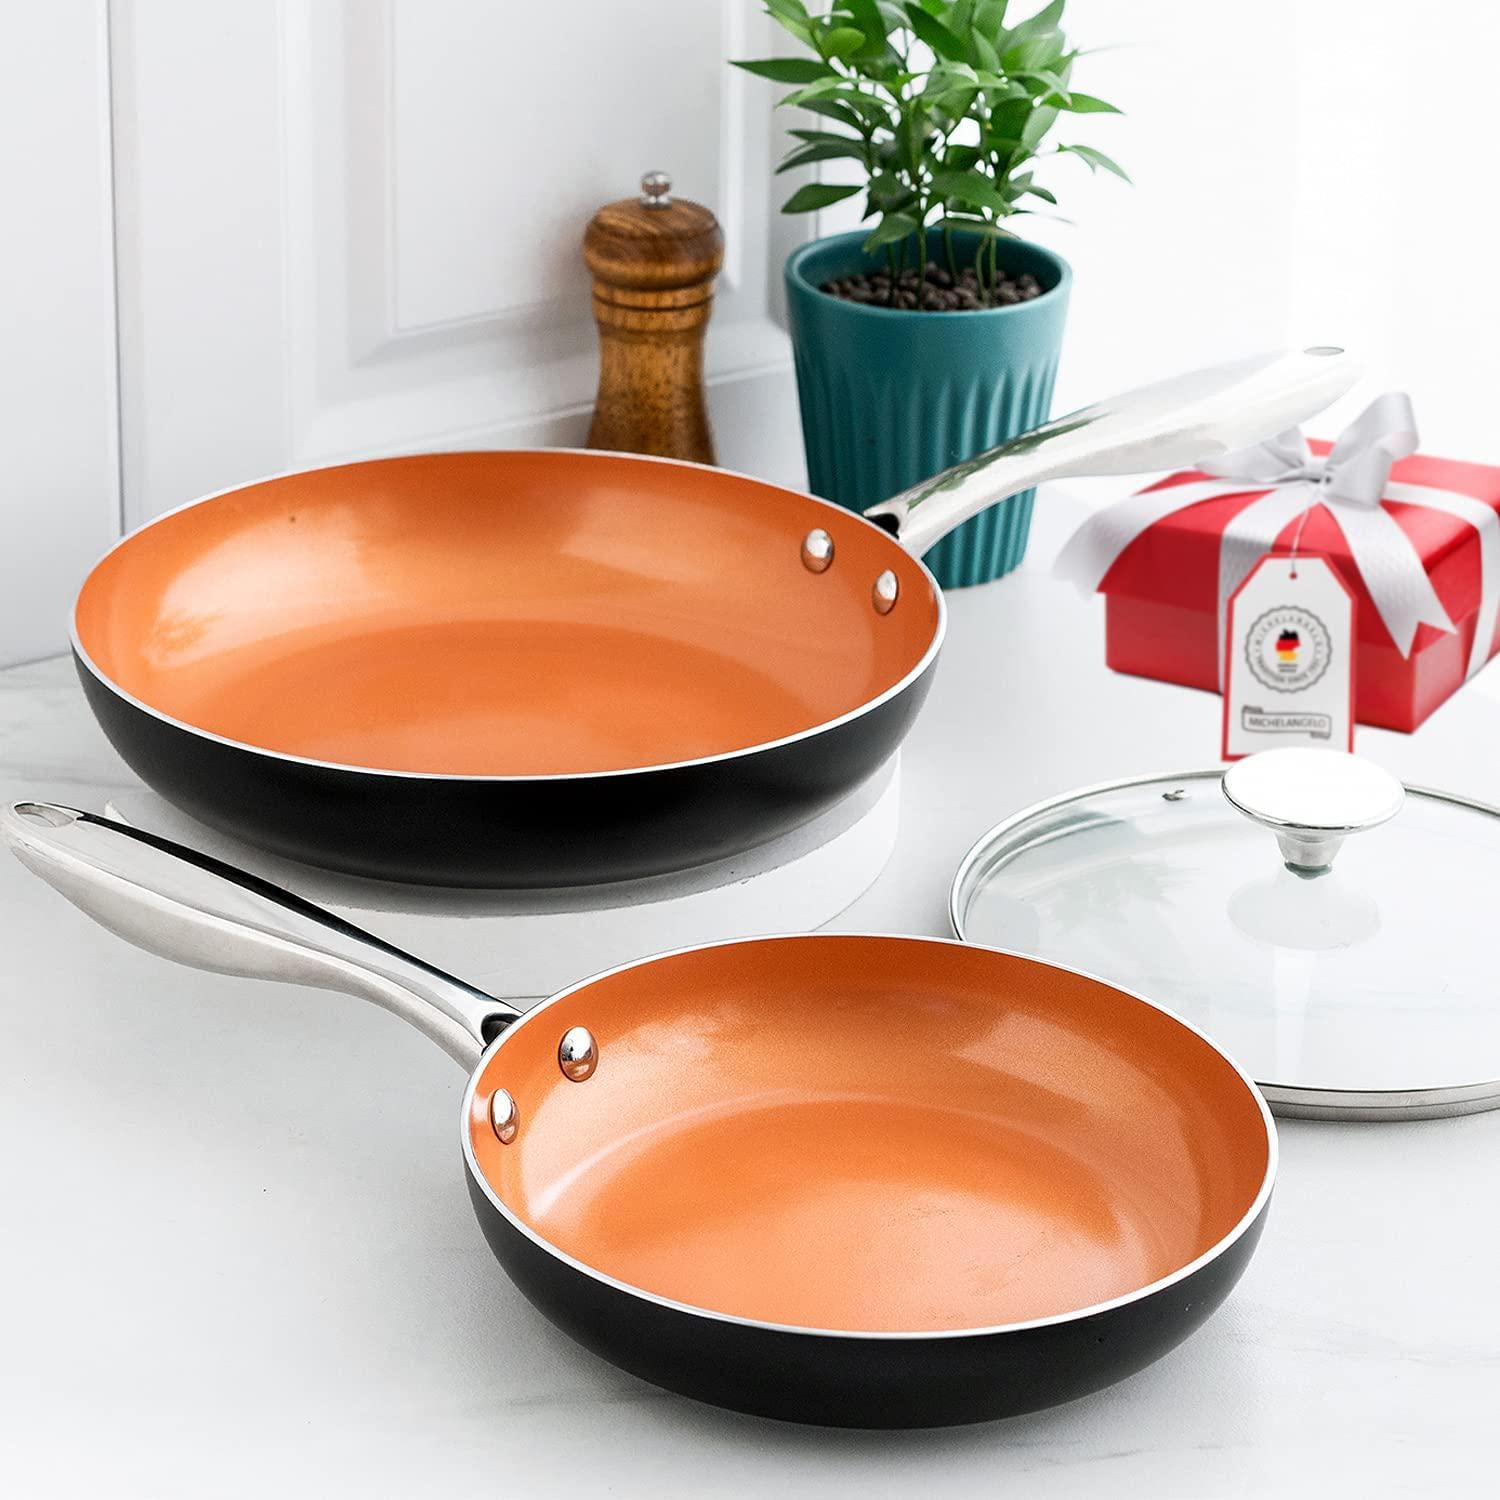 MICHELANGELO, MICHELANGELO Frying Pan Set, 9.5 and 11 Copper Frying Pan Set with Lid, Nonstick Frying Pan With Titanium Ceramic Interior, Frying Pans Nonstick, Nonstick Skillets, Induction Compatible